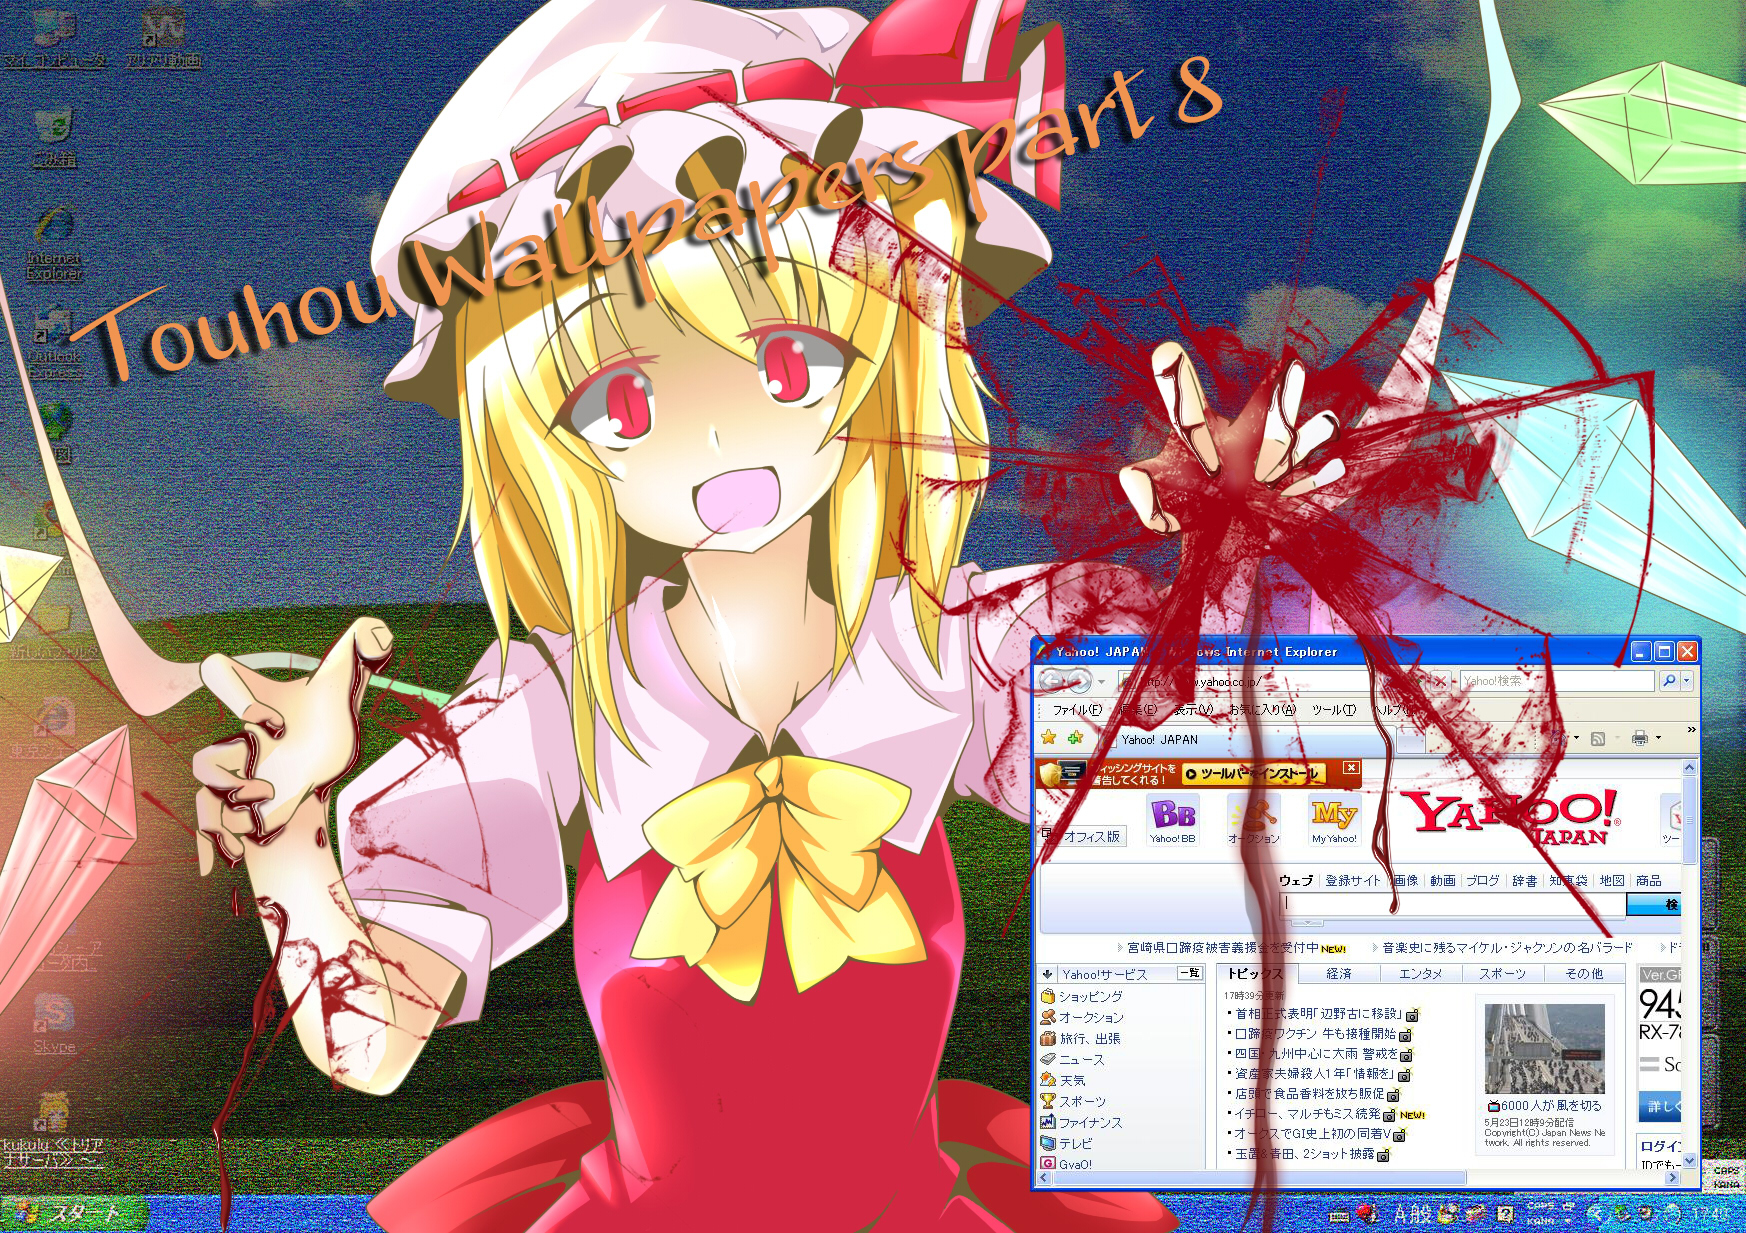 Touhou Wallpapers part 8